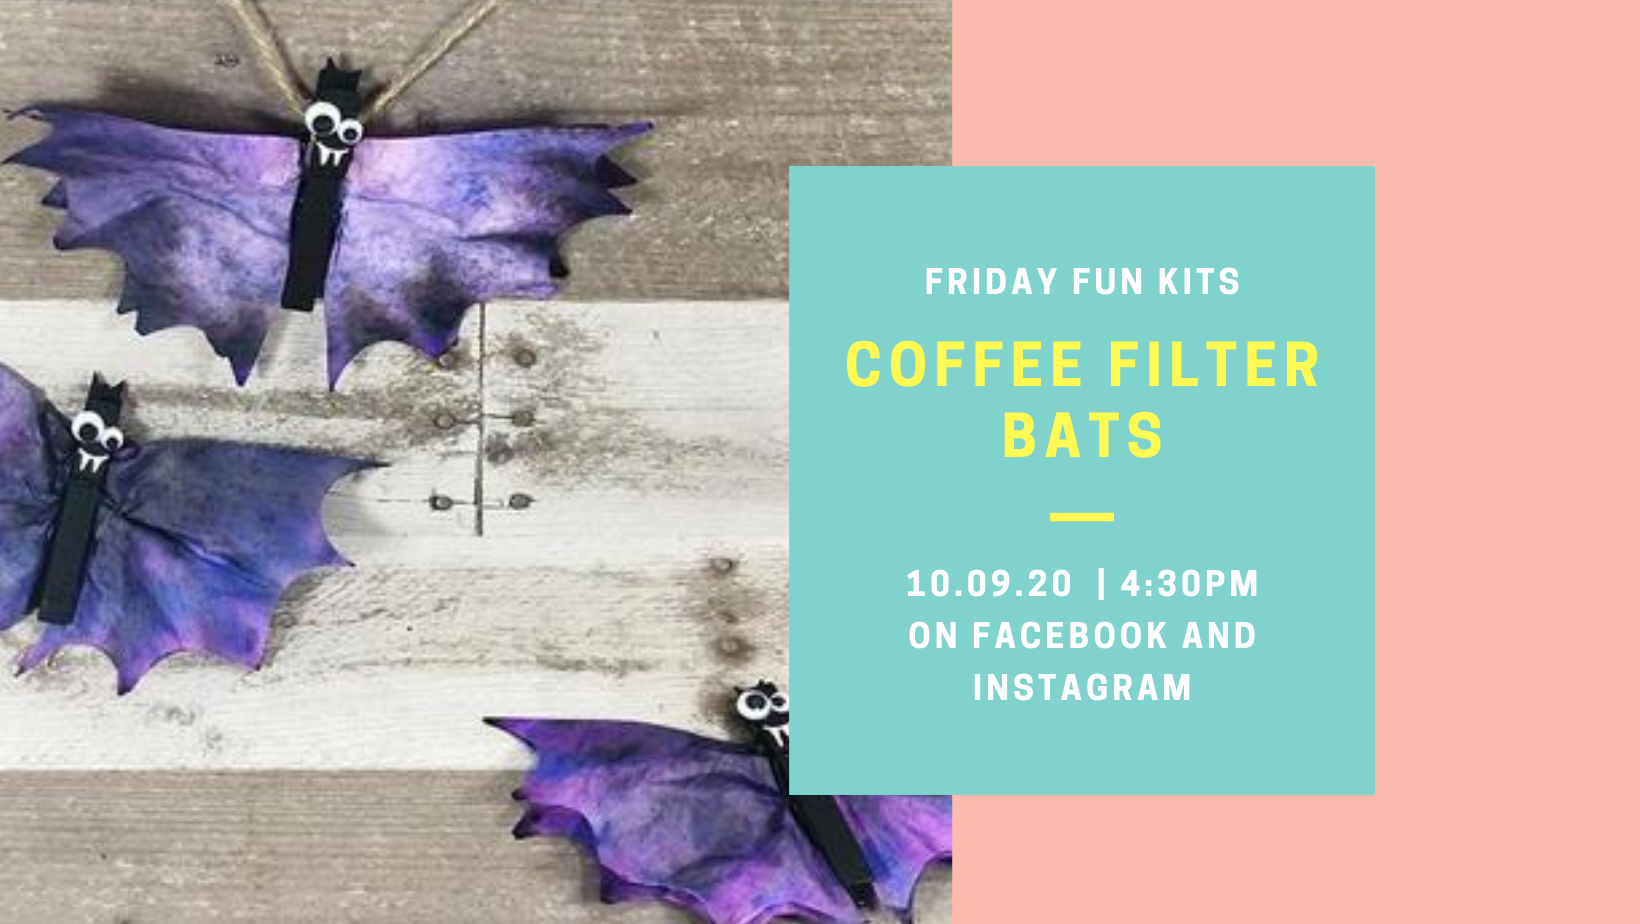 Clothespin bats with coffee filter wings